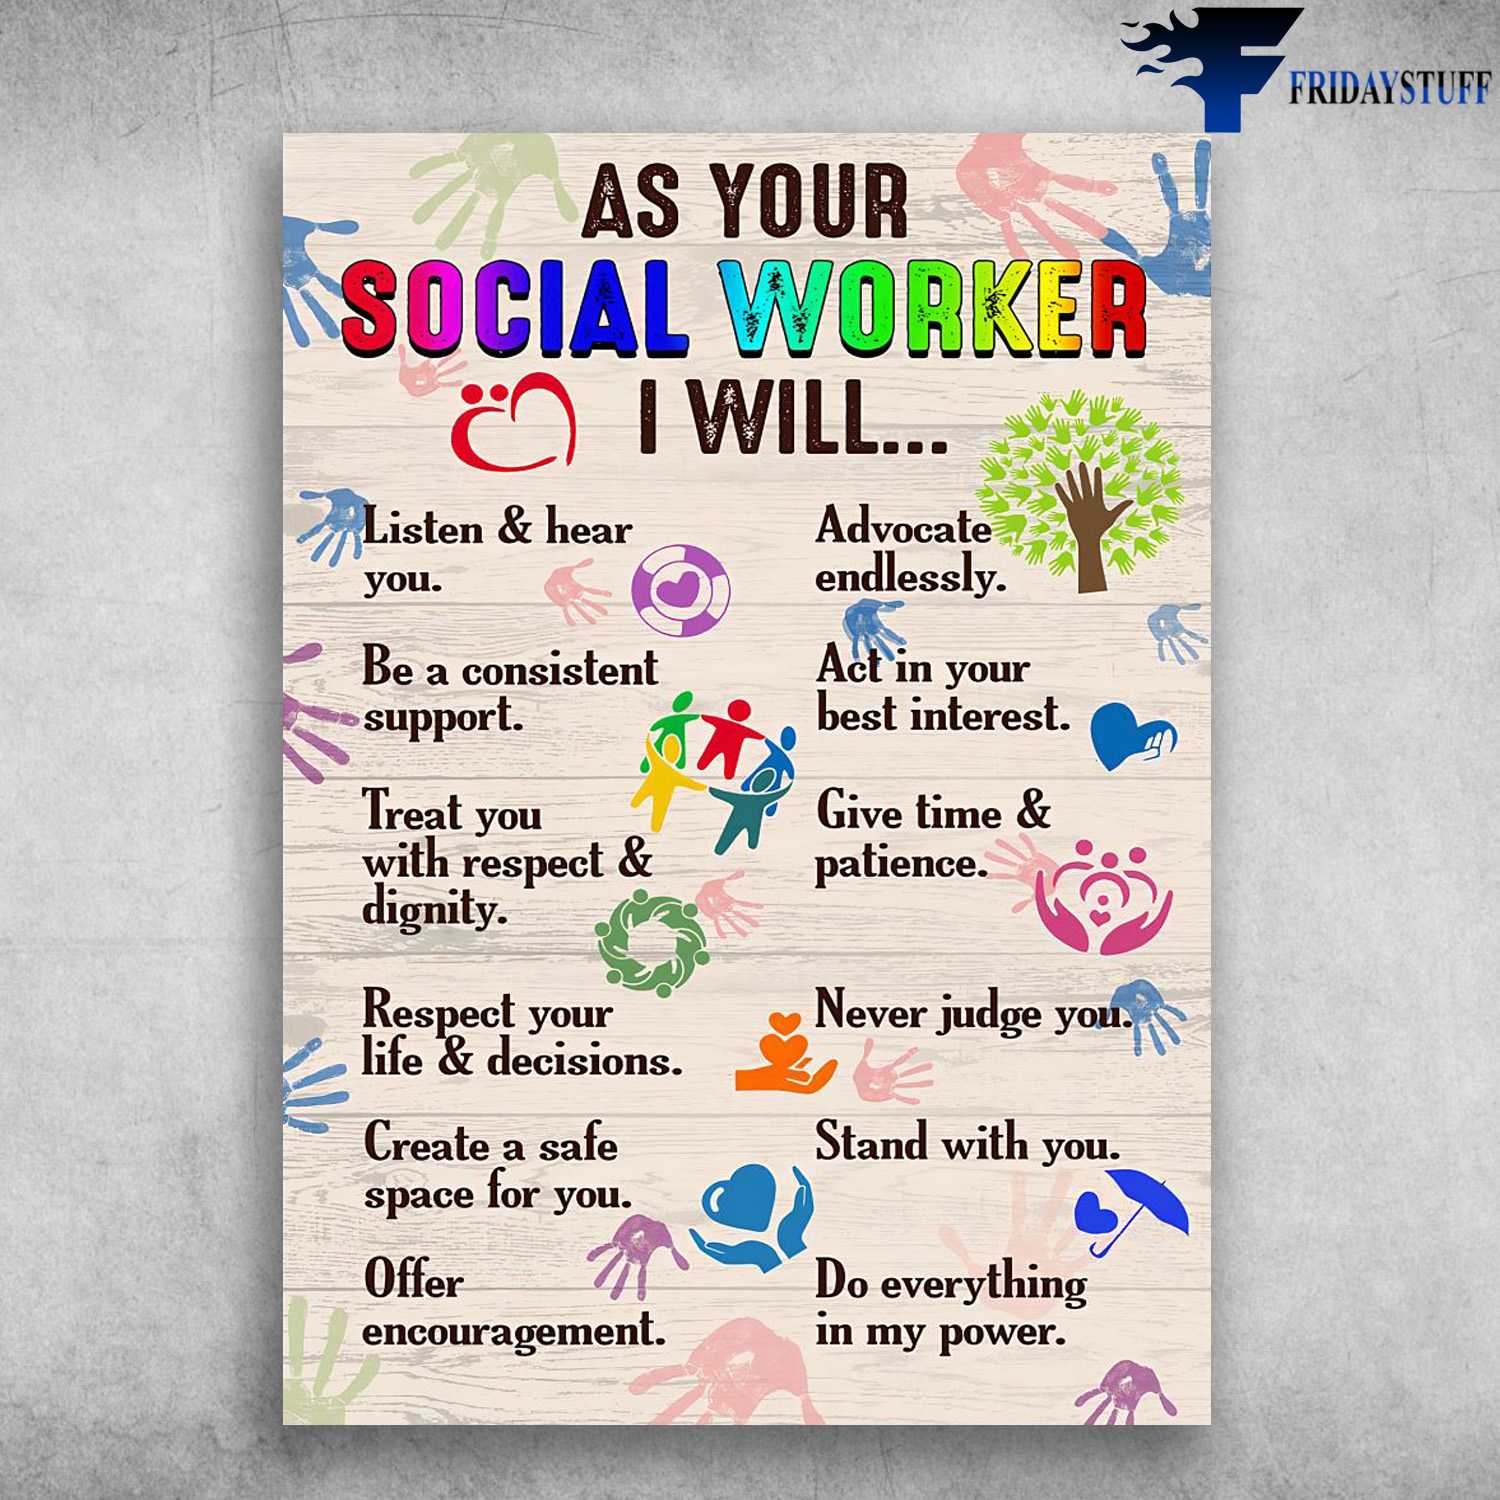 Social Worker - As Your Social Worker, I Will Listen And Hear You, Advocate Endlessly, Offer Encouragement, Do Everything In My Power